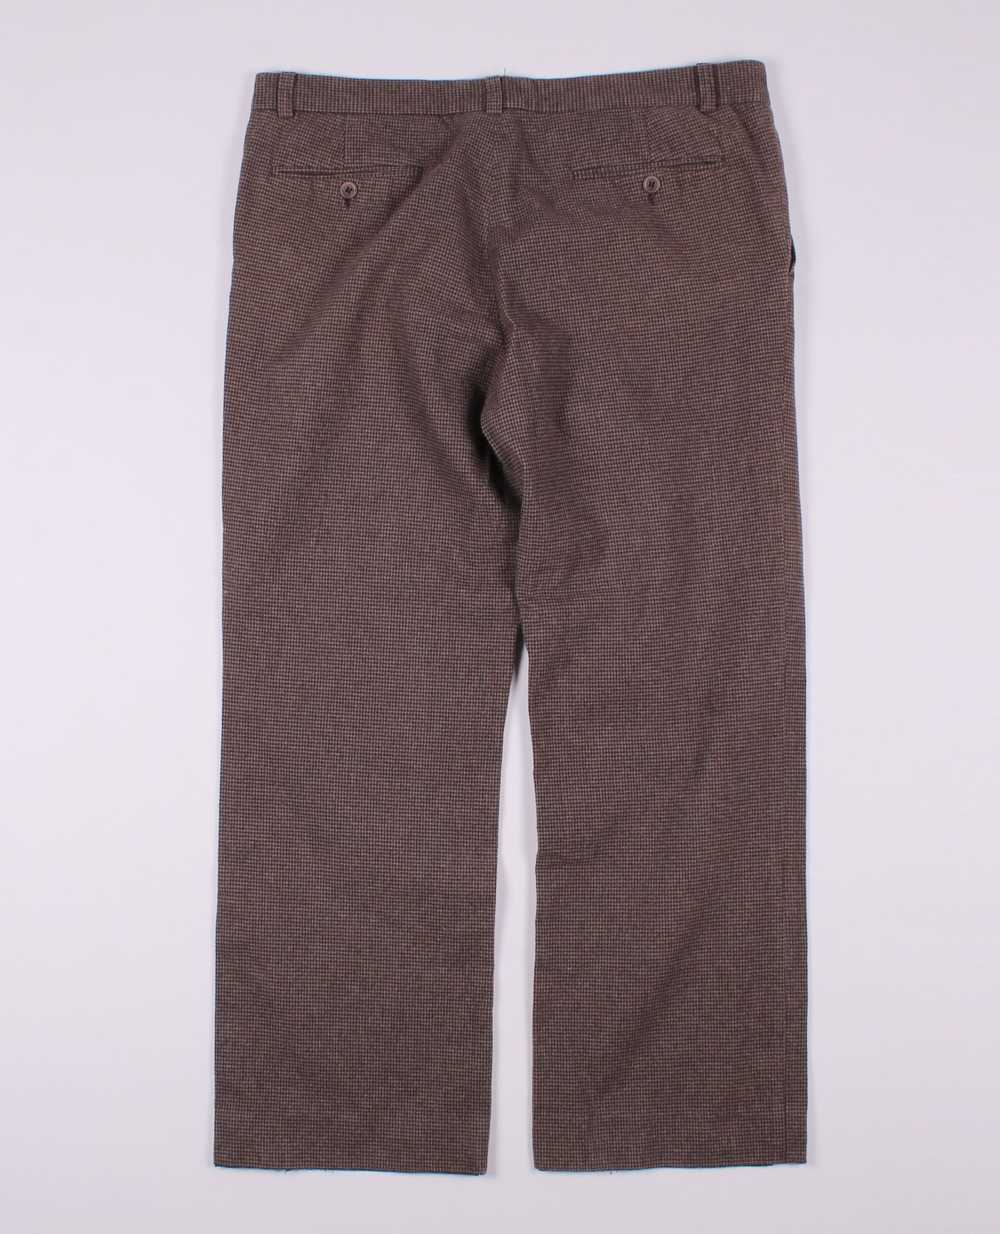 A.P.C. Vintage A.P.C. Wool Chino Trousers Pants - image 6